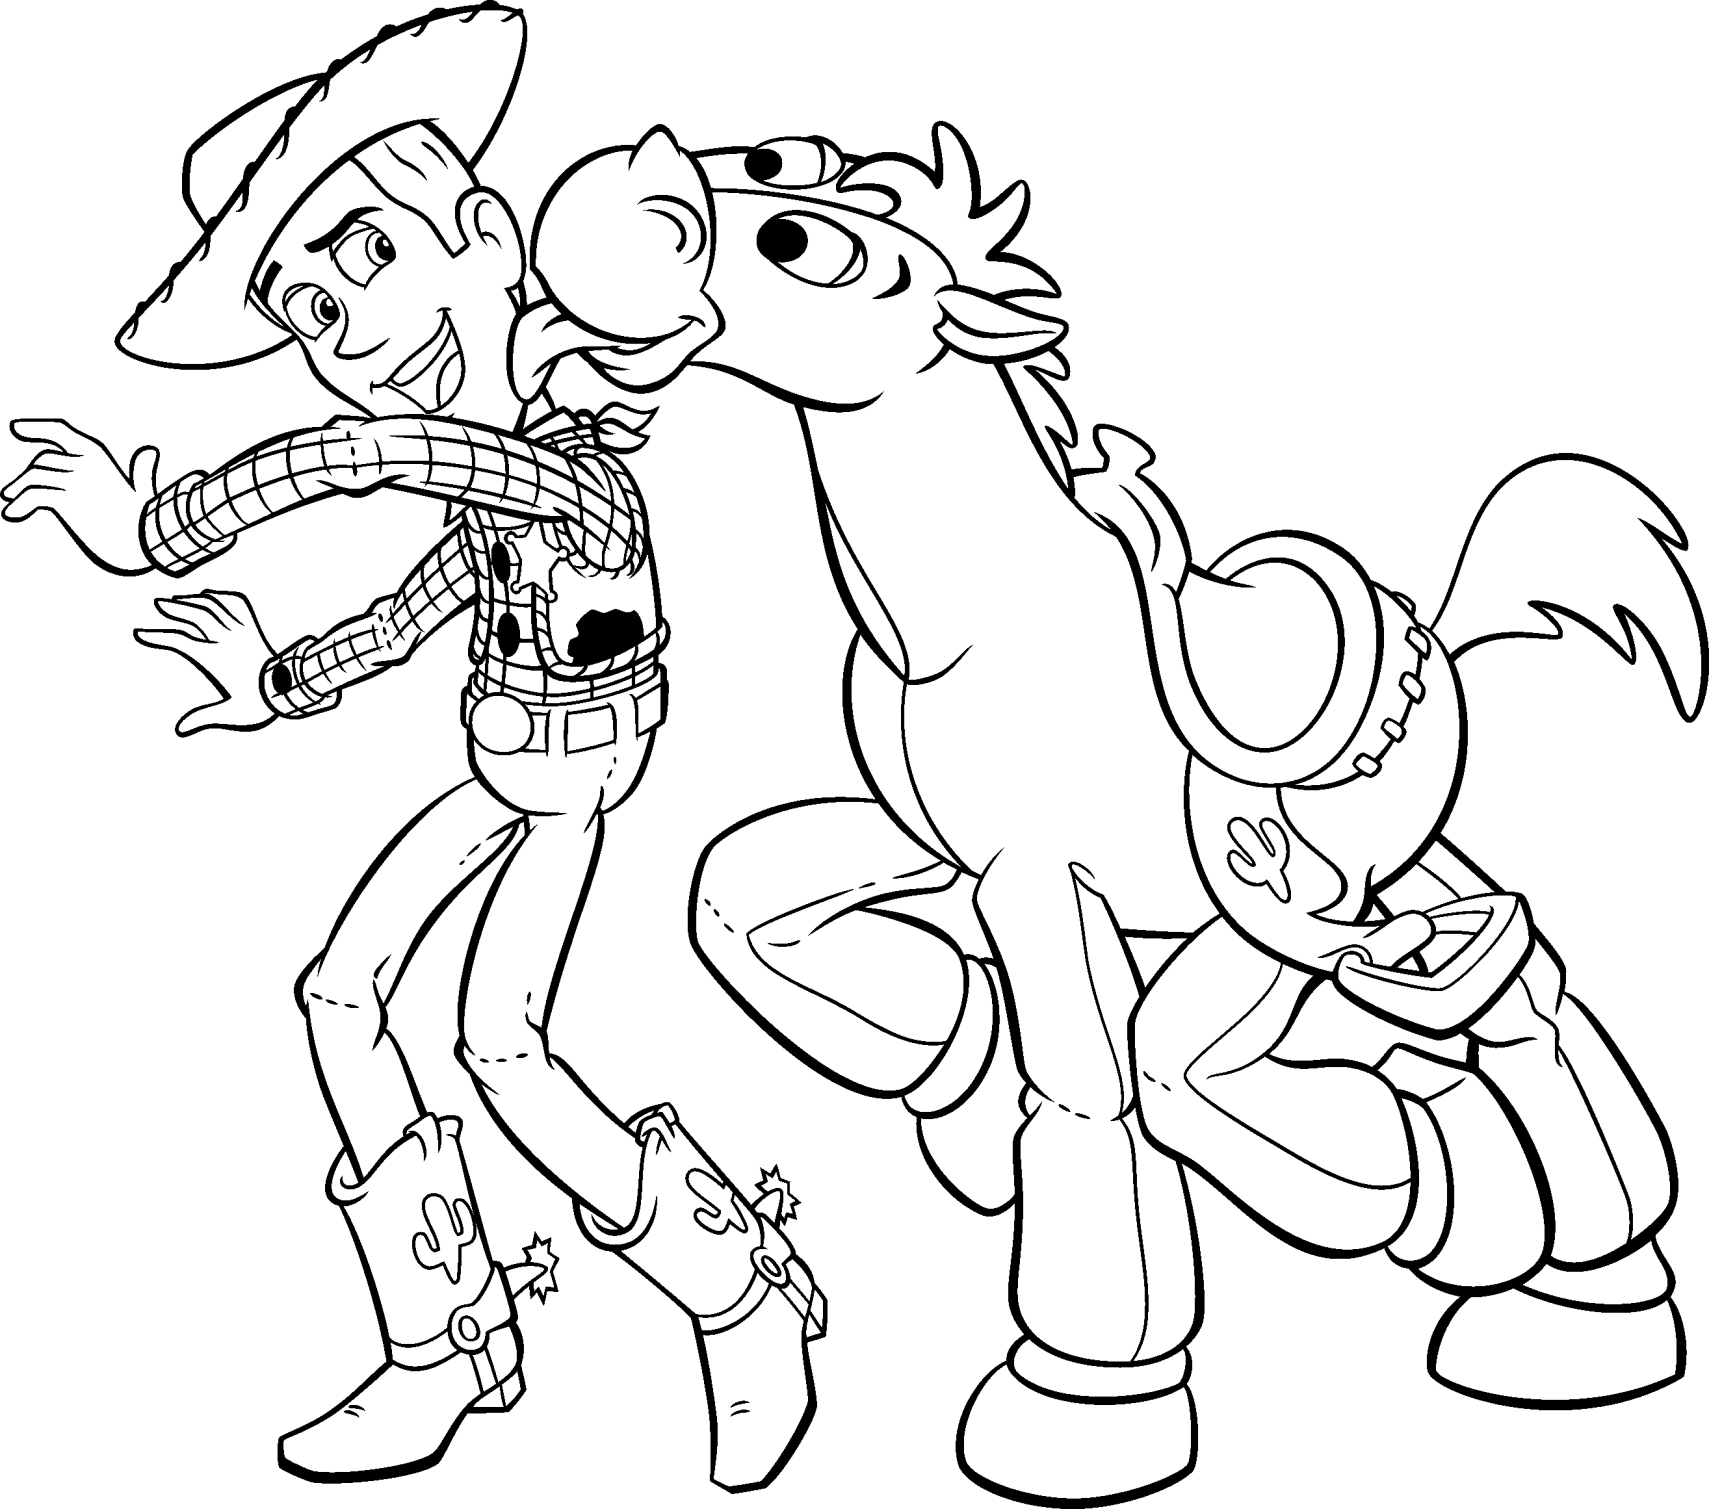 Toy story - Printable coloring pages title=